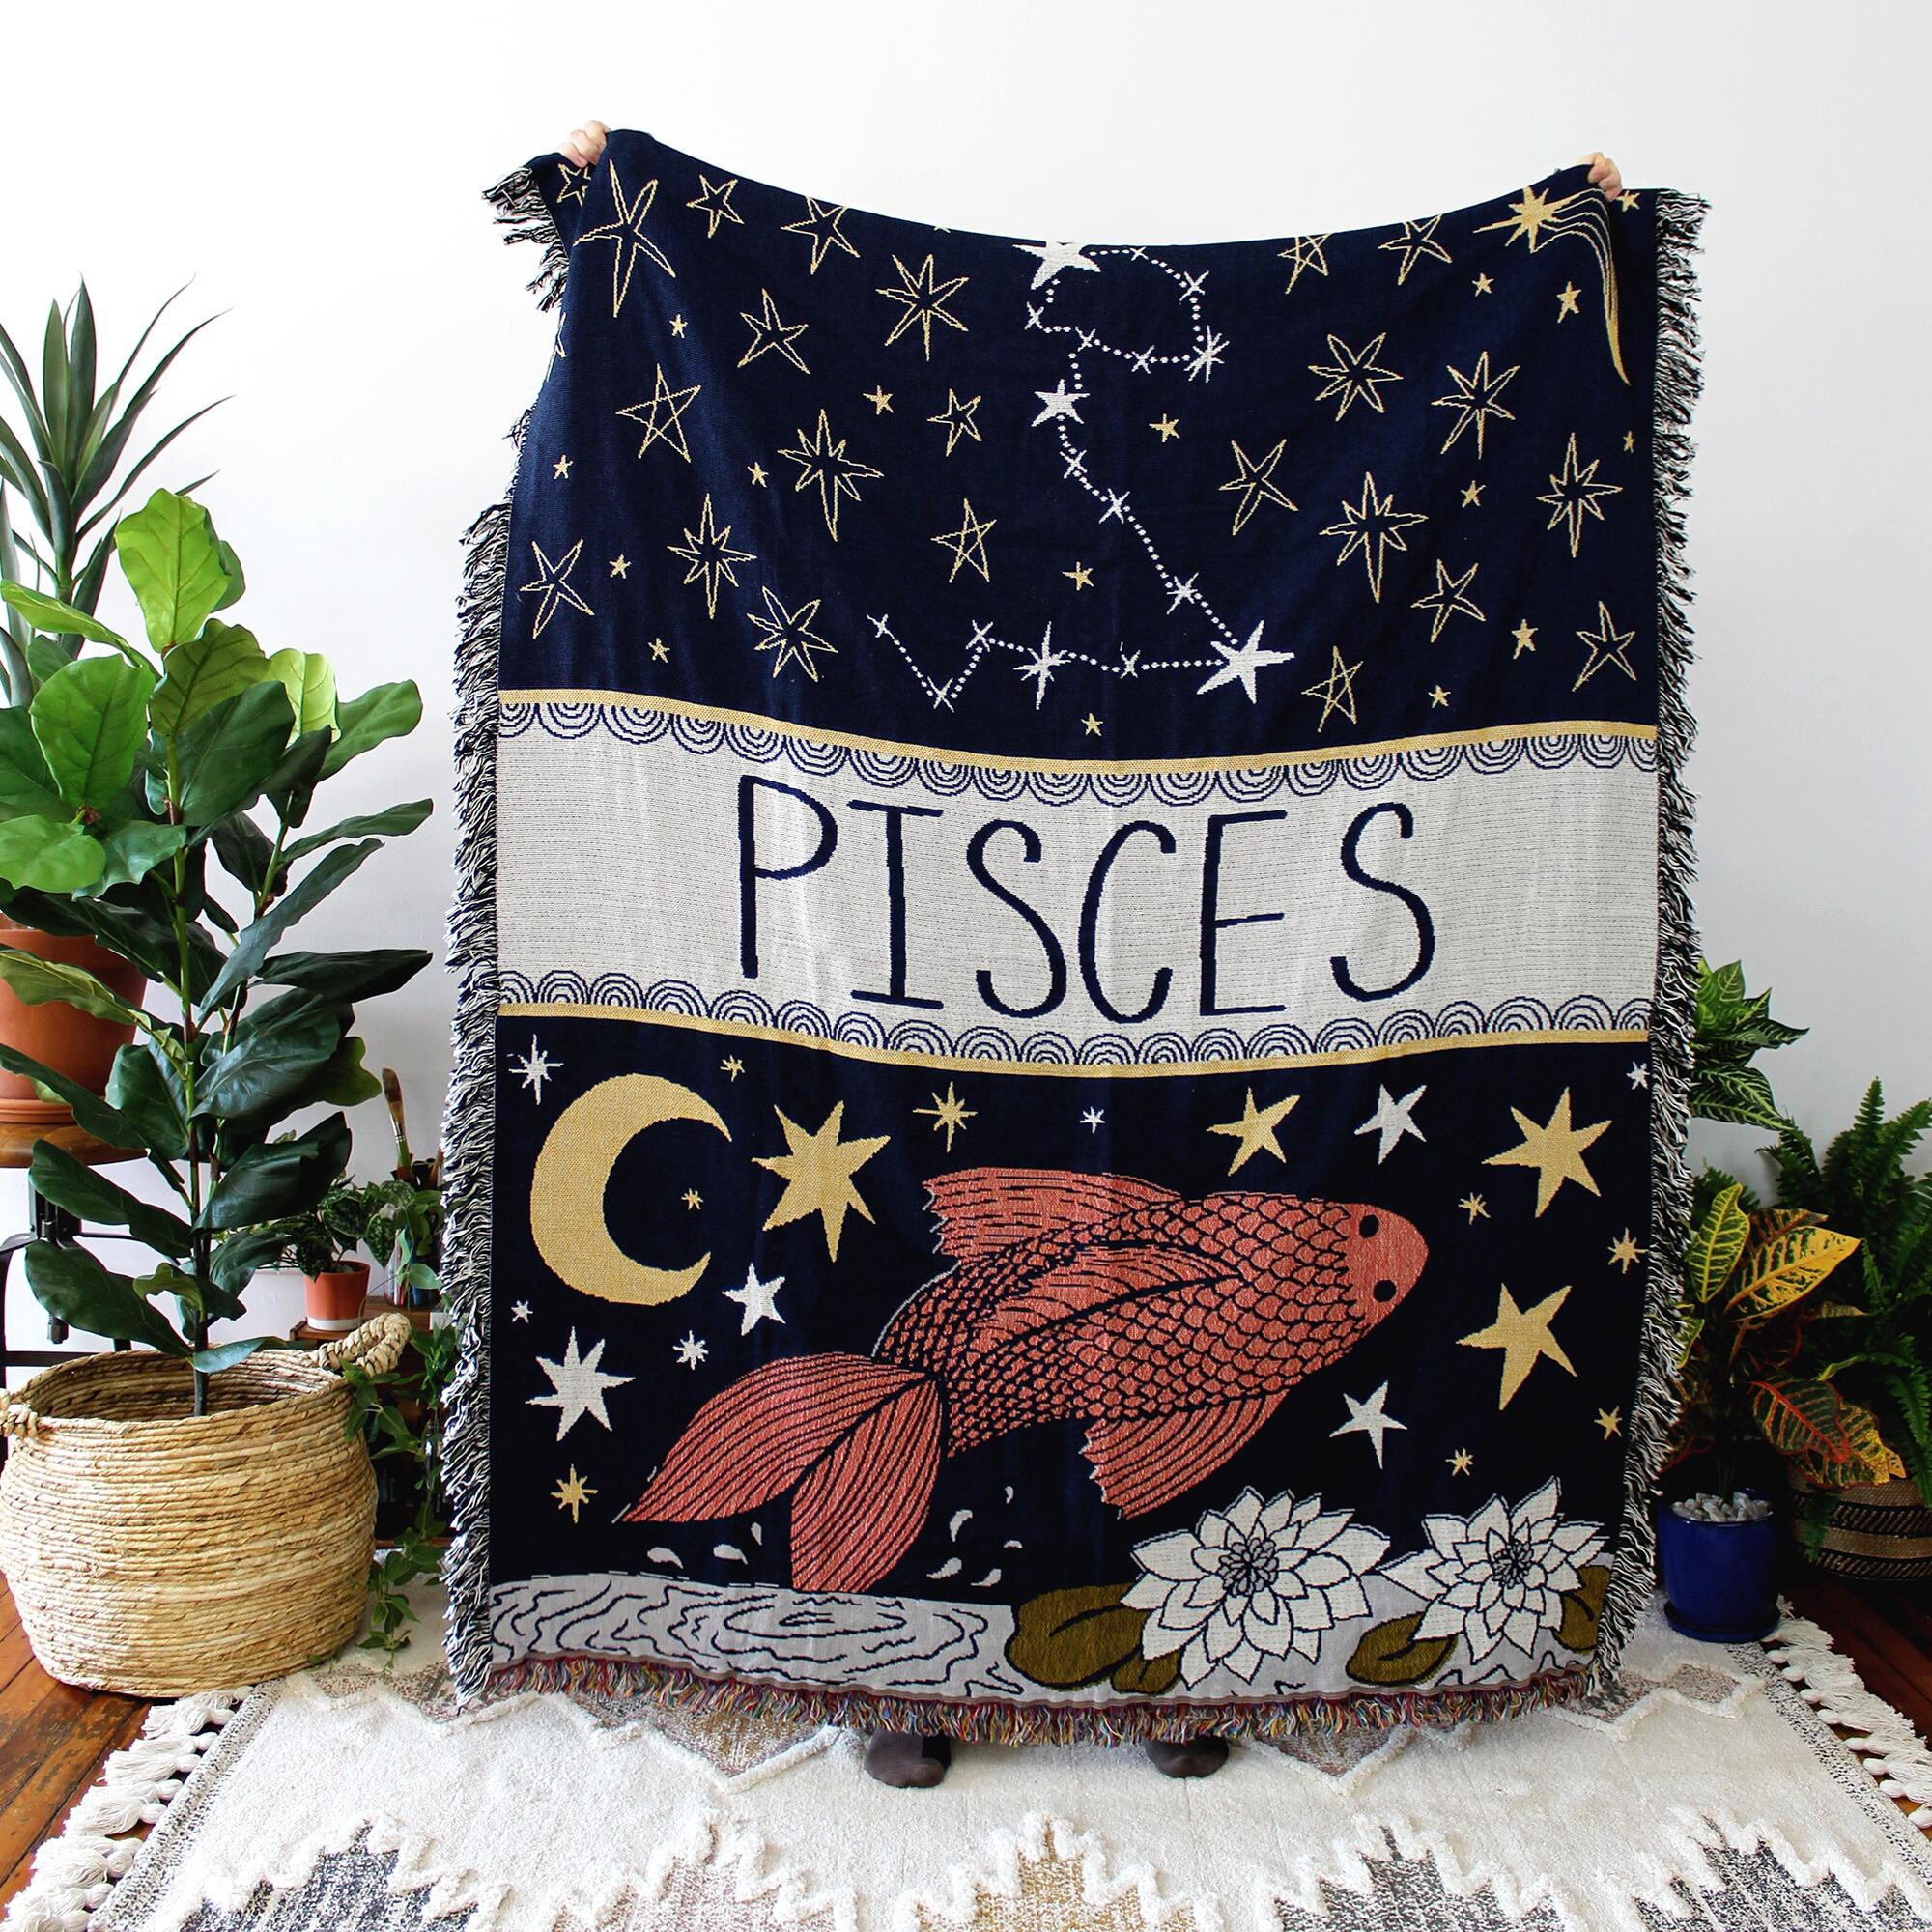 A blanket with the word "Pisces" and a drawing of a fish and stars   